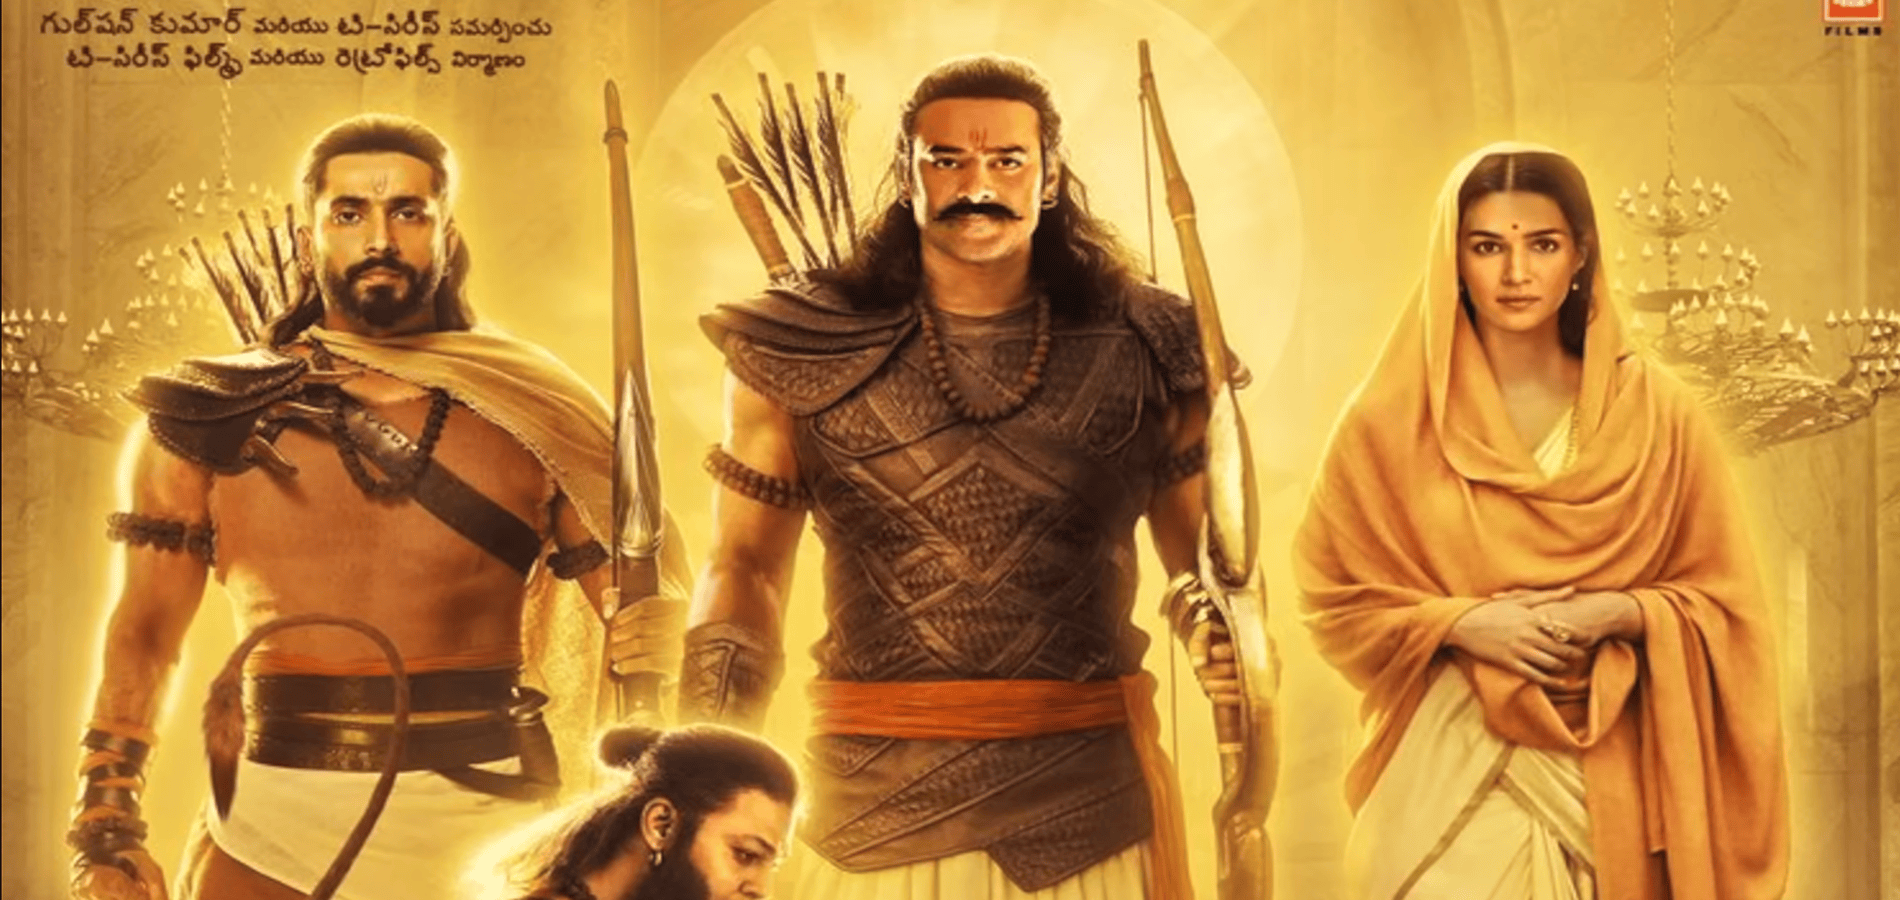 Adipurush movie, Film Makers did not Realize Characters Importance